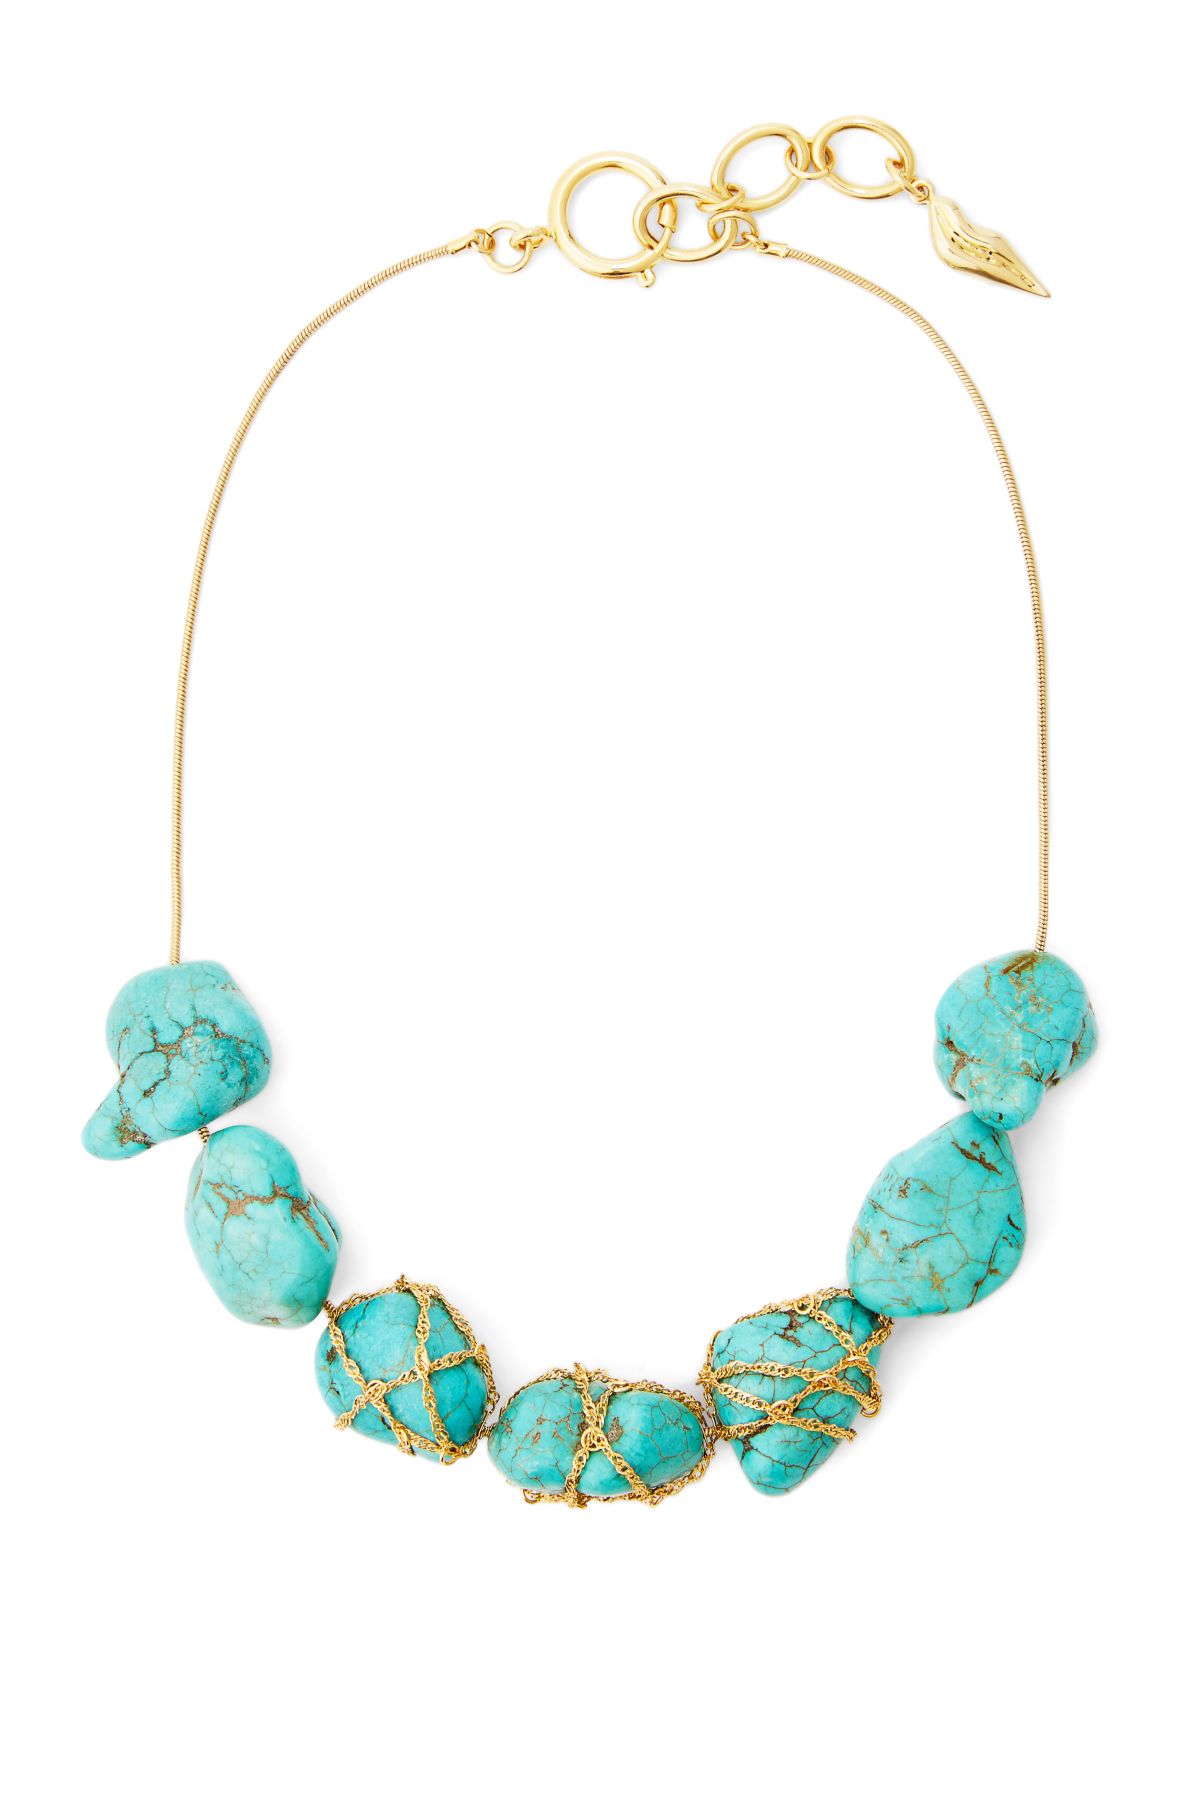 Semiprecious Turquoise Stone and Chain Necklace